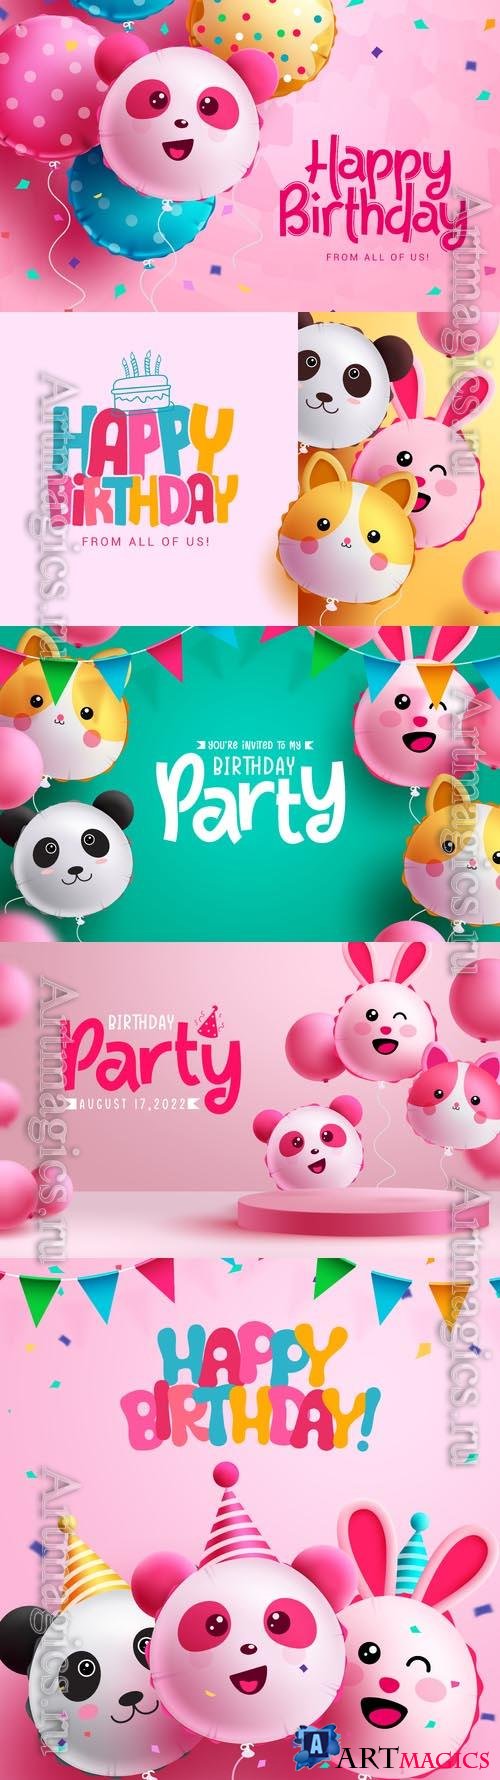 Happy birthday greeting vector design, birthday character panda balloon elements for kids party